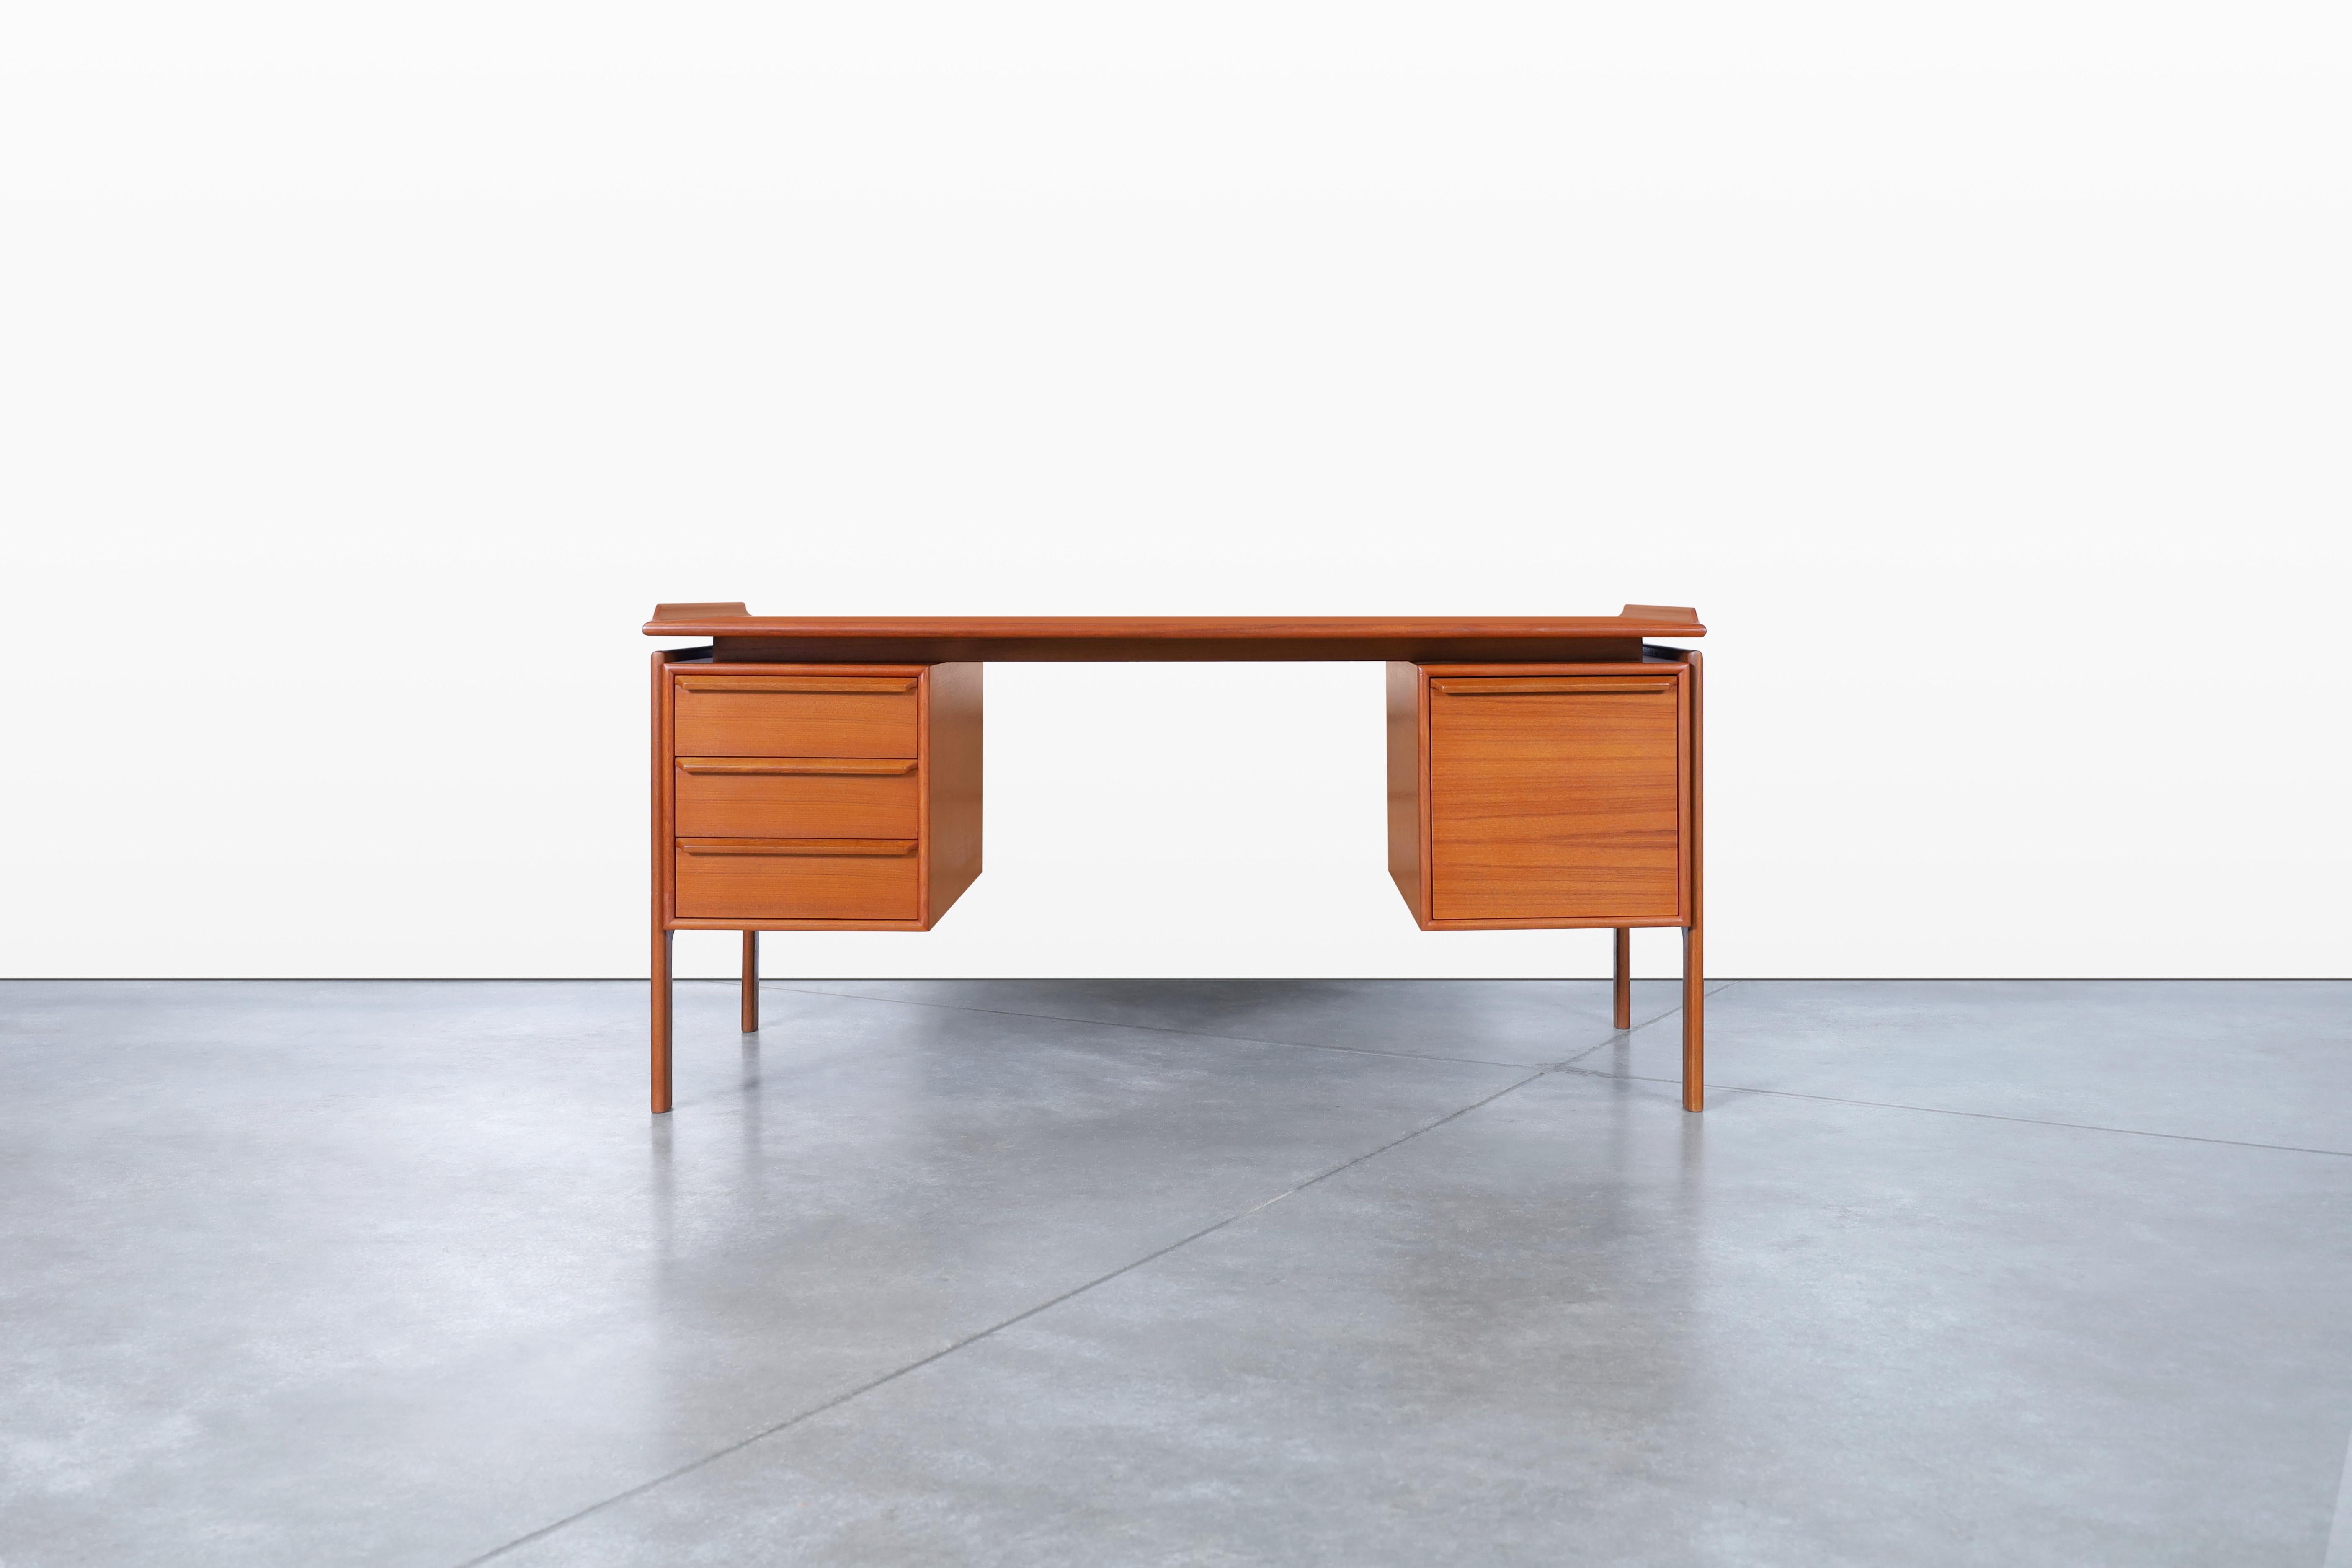 Wonderful Danish modern floating top teak desk manufactured by G.V. Møbler in Denmark, circa 1960s. This desk has an innovative design where you can appreciate the fine attention to construction details and the delicacy of each line that makes up